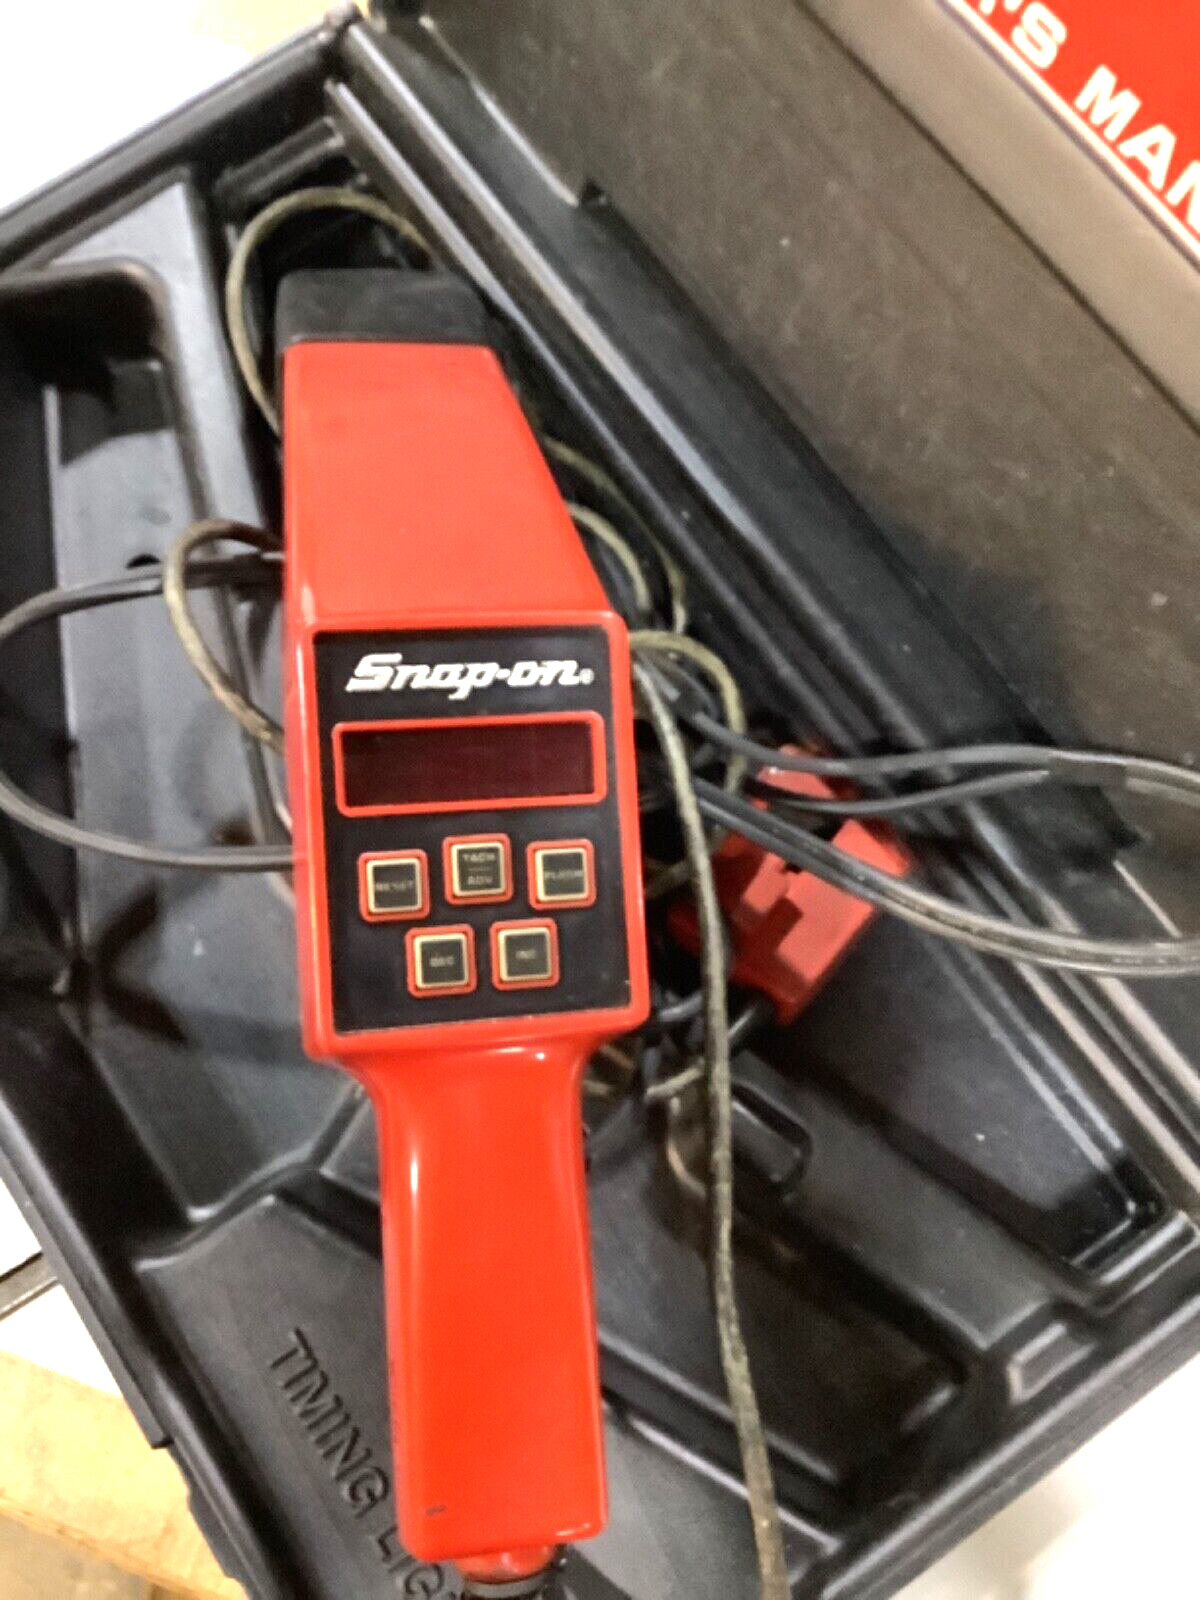 Snap On timing light MT 1261A untested